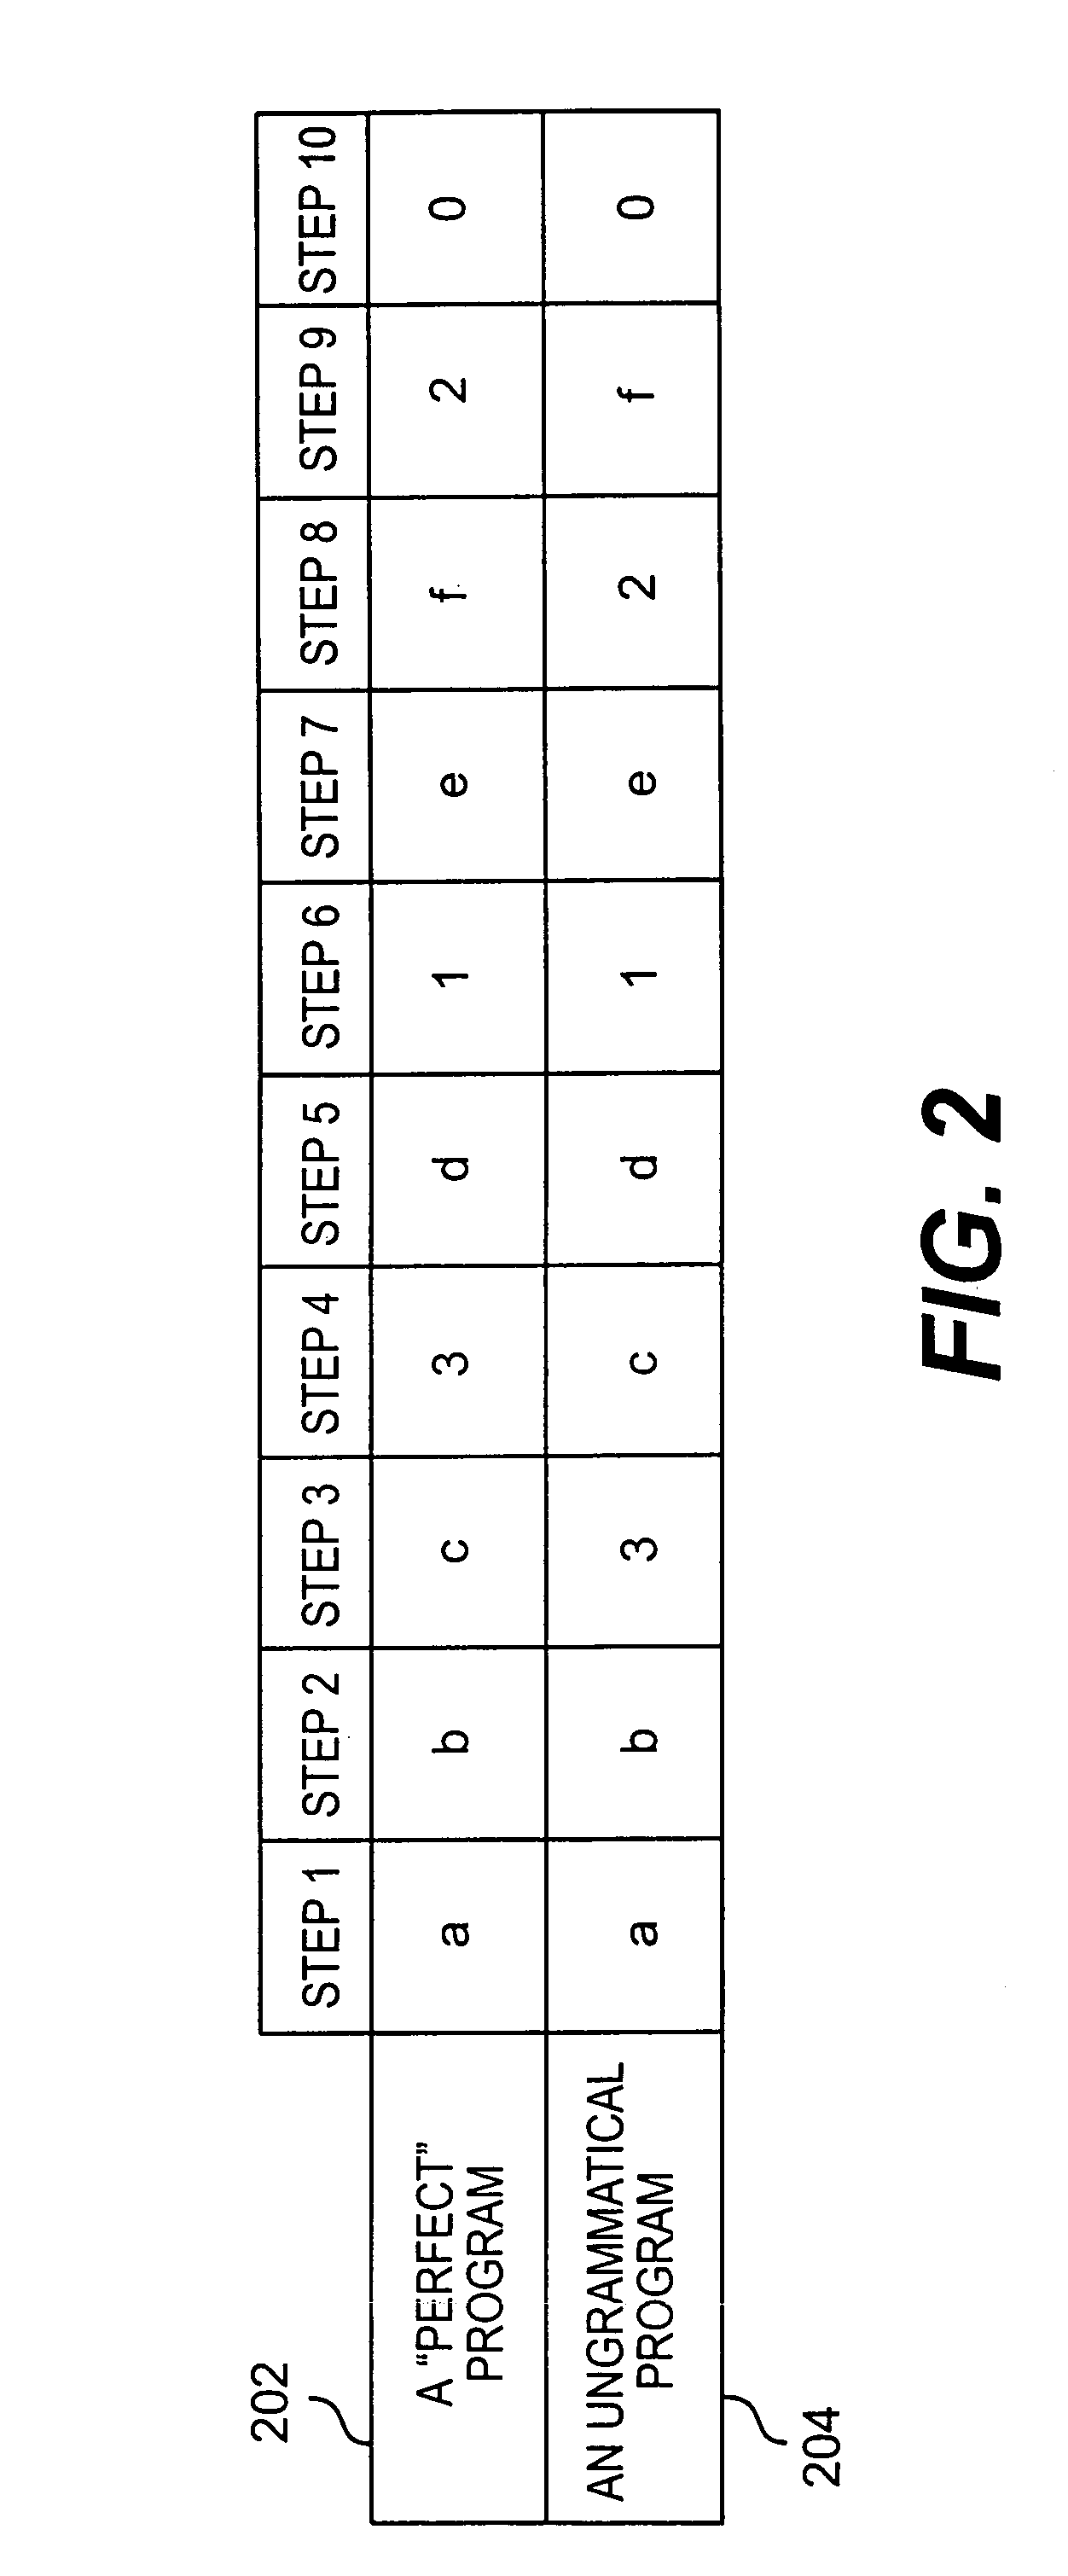 Fault tolerant and combinatorial software environment system, method and medium